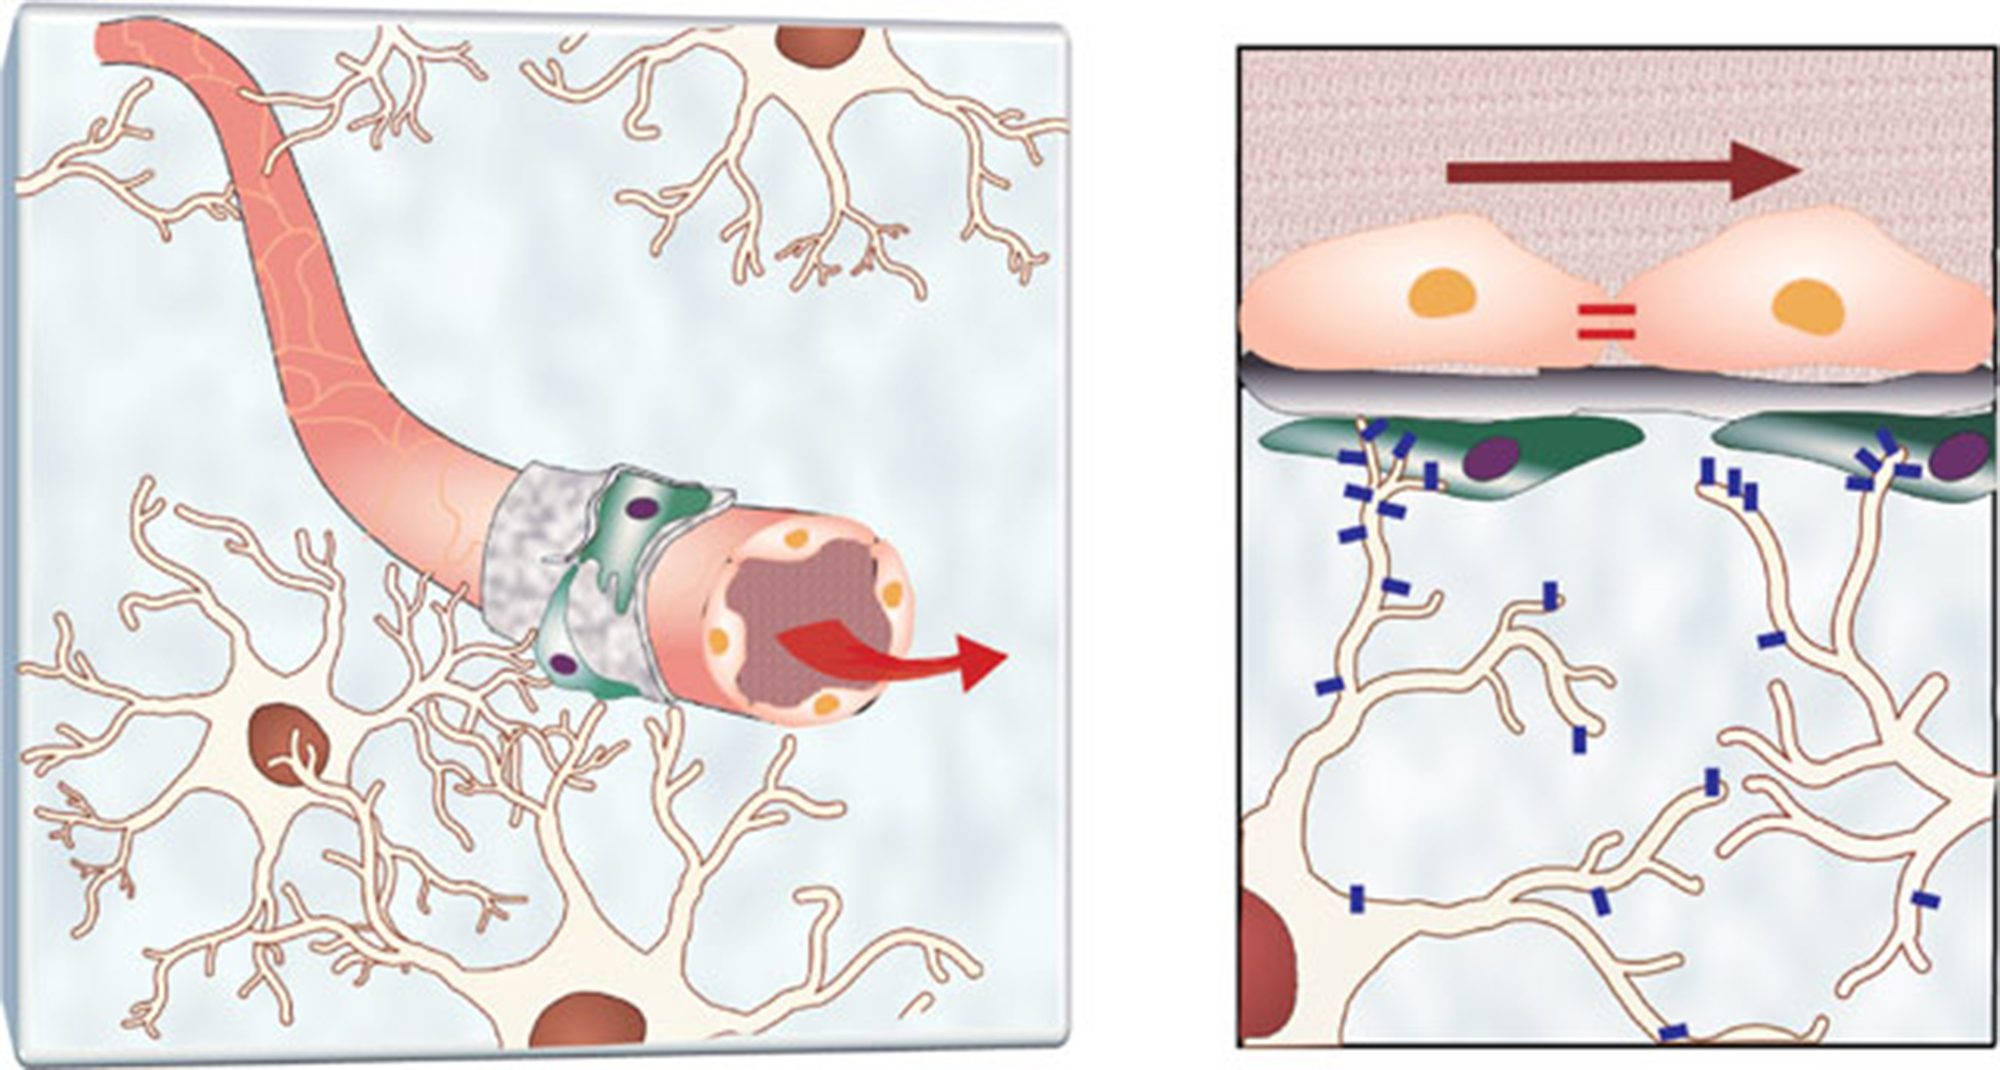 Illustration of human astrocytes (white) interfacing with endothelial cells in the vasculature. On the right, aquaporin-4 is expressed for the exchange of water and some nutrients and waste. Credit: Georgia Tech / Kim lab / Yonsei University College of Medicine